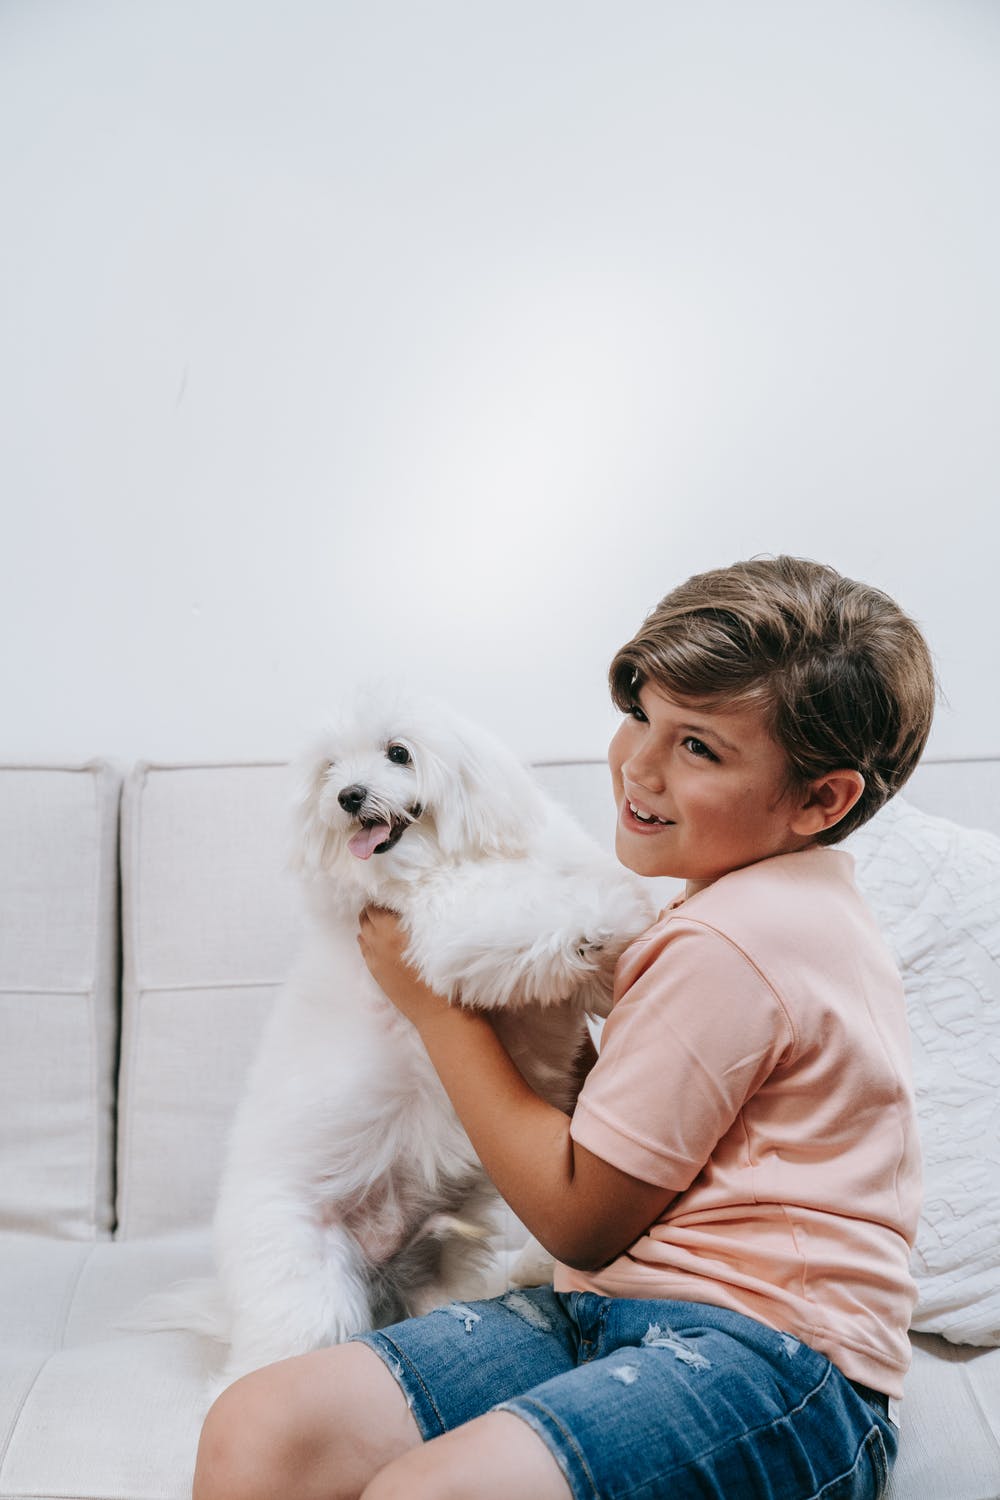 Pear and I are best friends | Source: Pexels